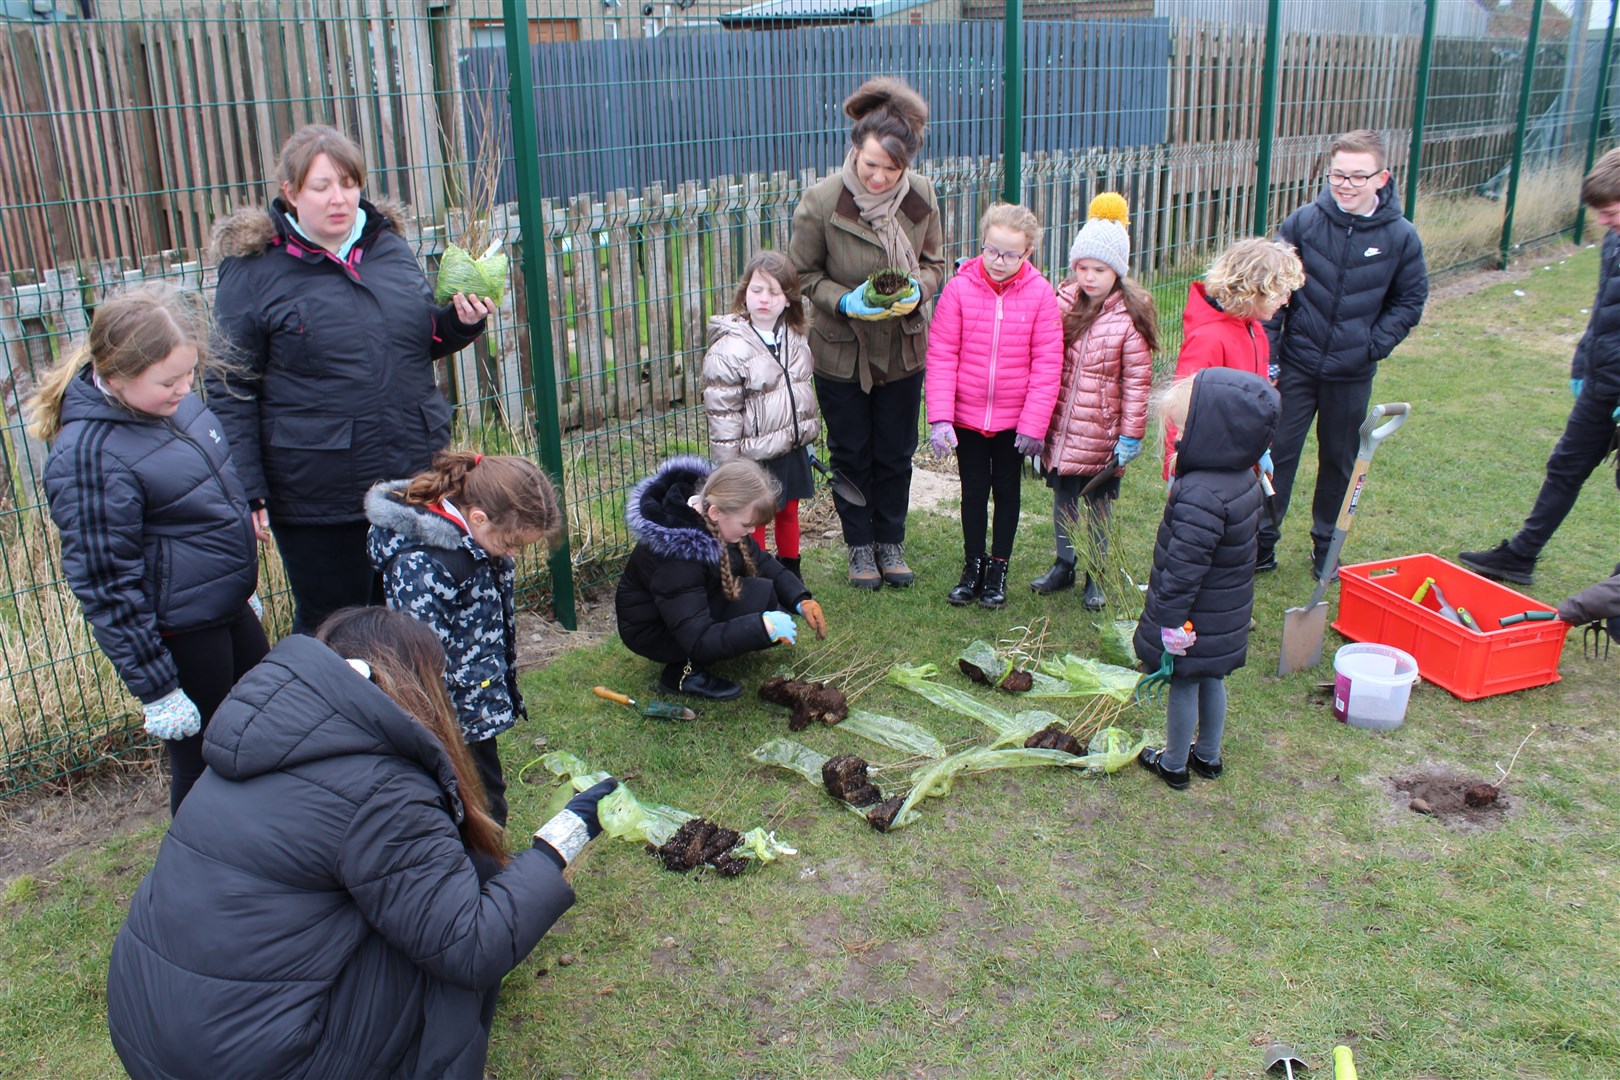 Pupils at St Gerardine's Primary School in Lossiemouth have been planting trees to mark the Queen's Platinum Jubilee.